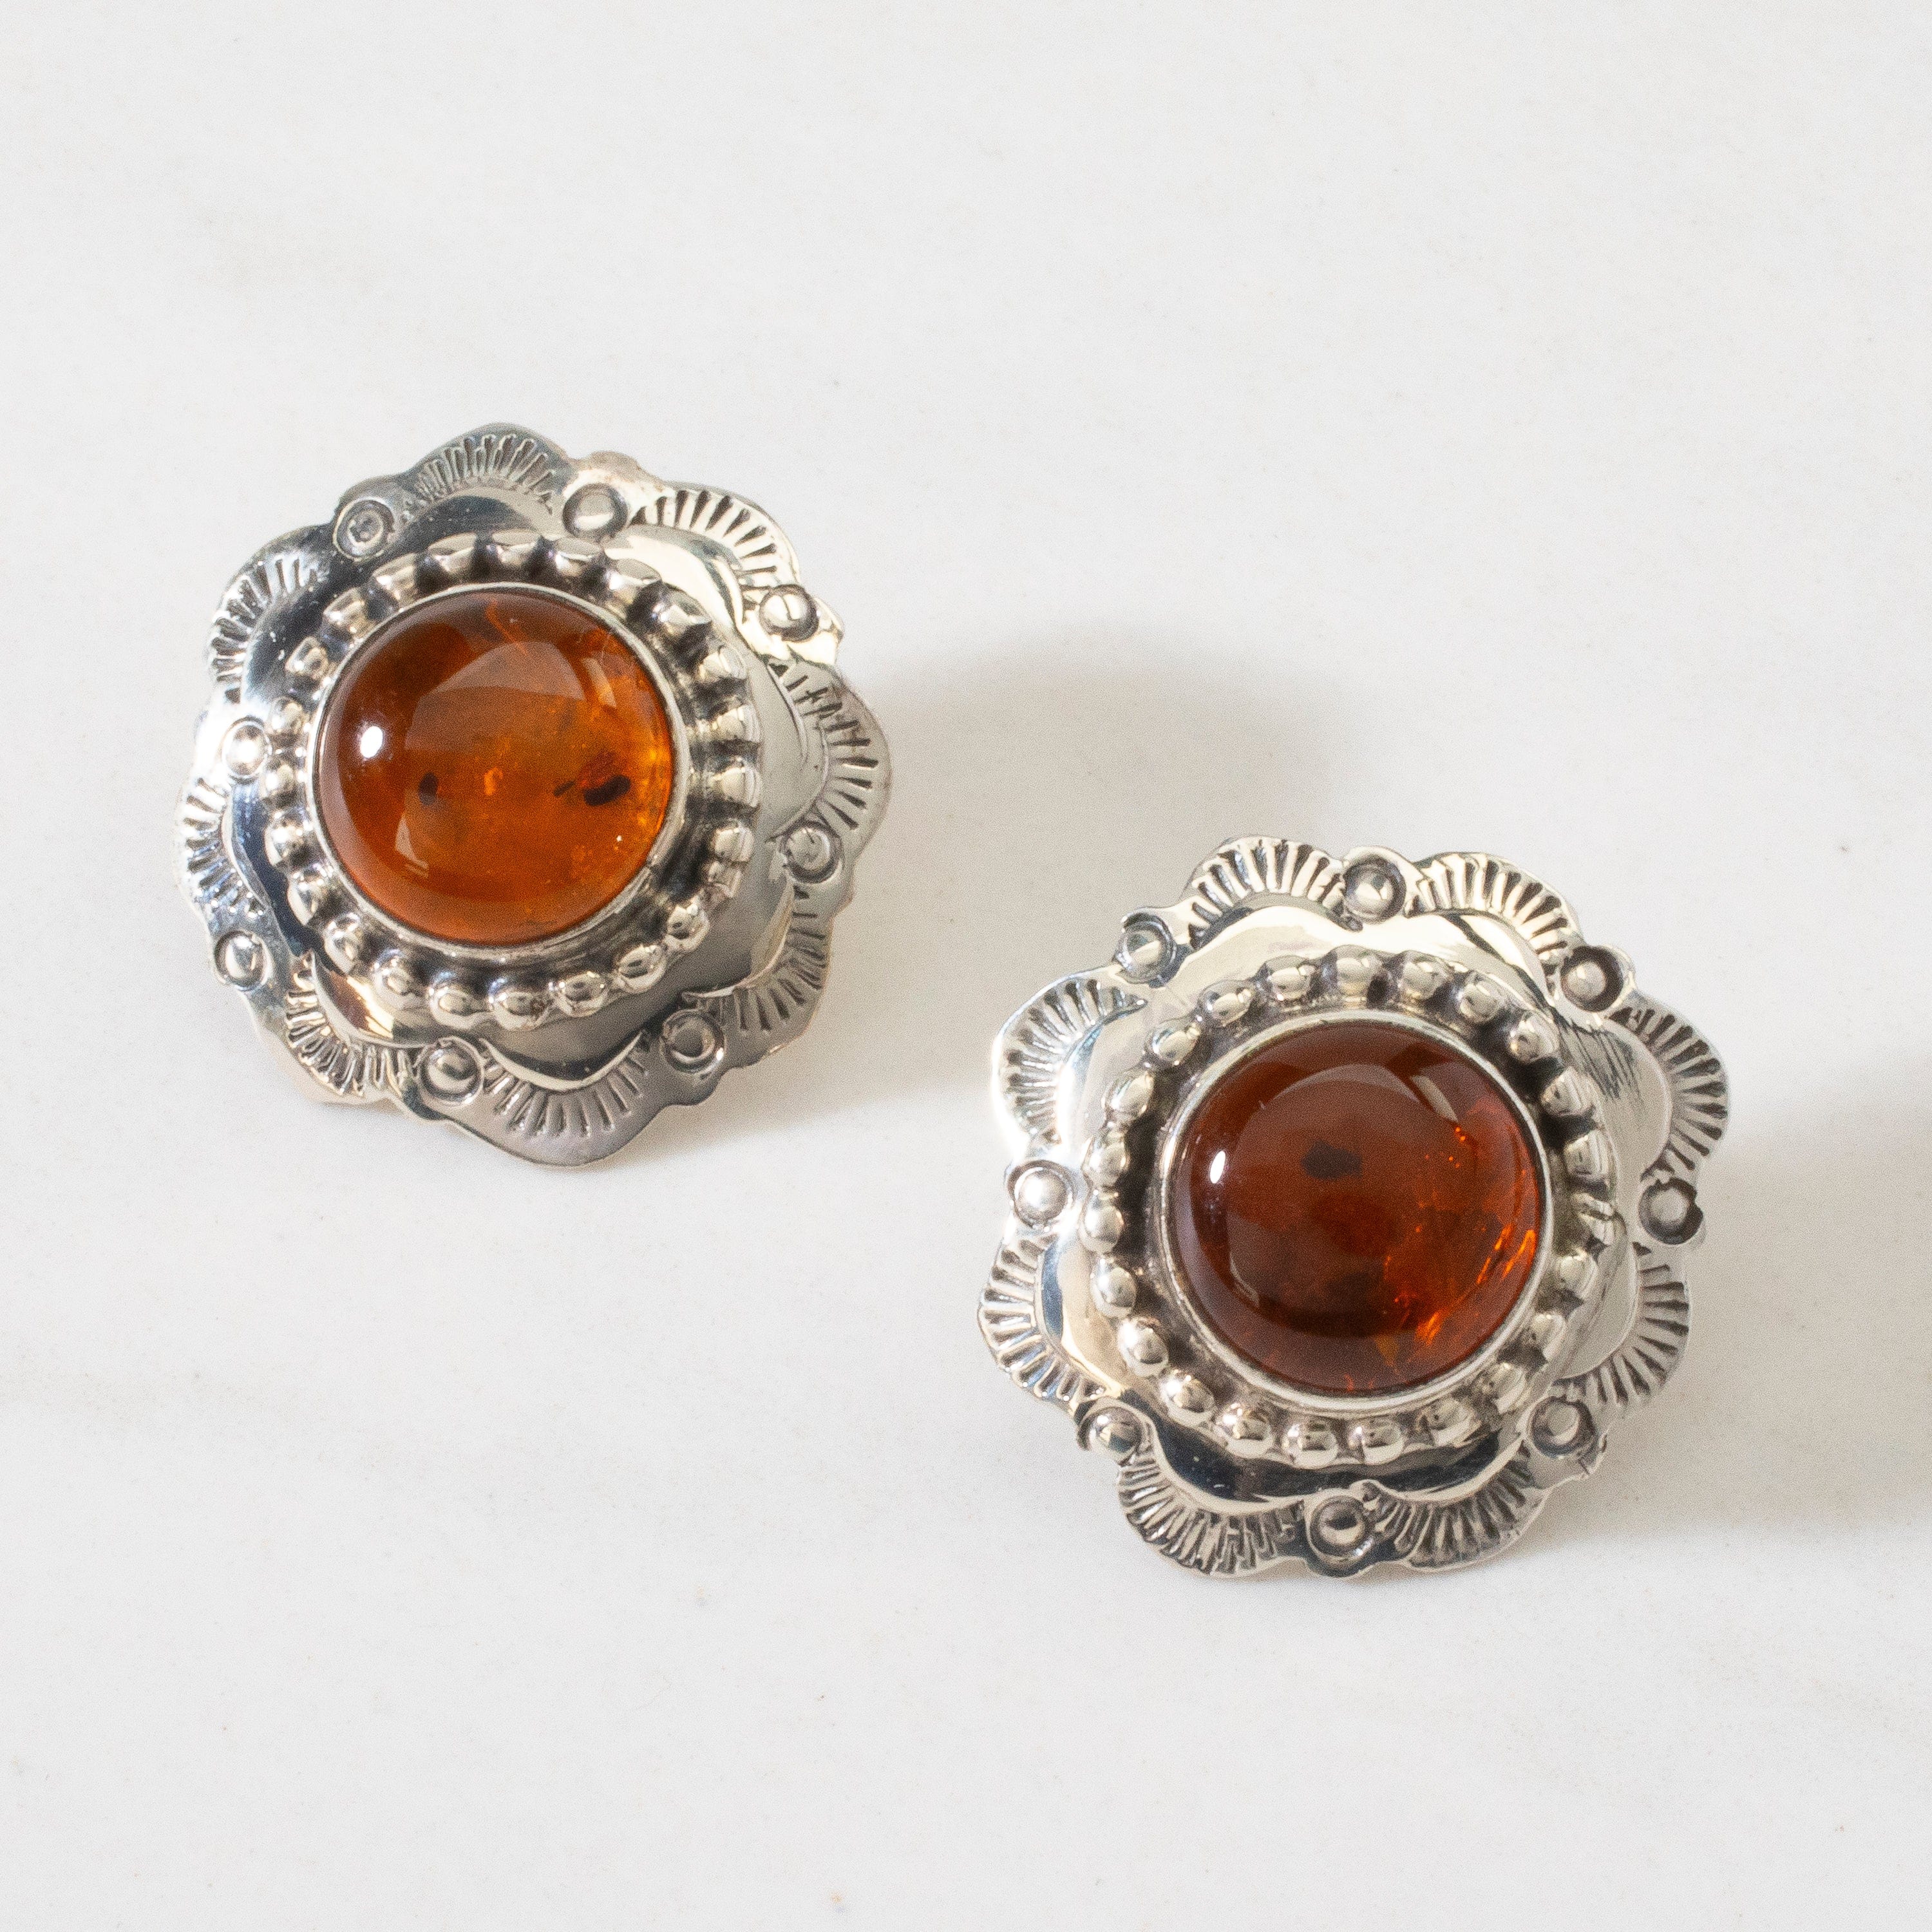 Kalifano Native American Jewelry Baltic Amber Navajo USA Native American Made 925 Sterling Silver Earrings with Stud Backing NAE300.024